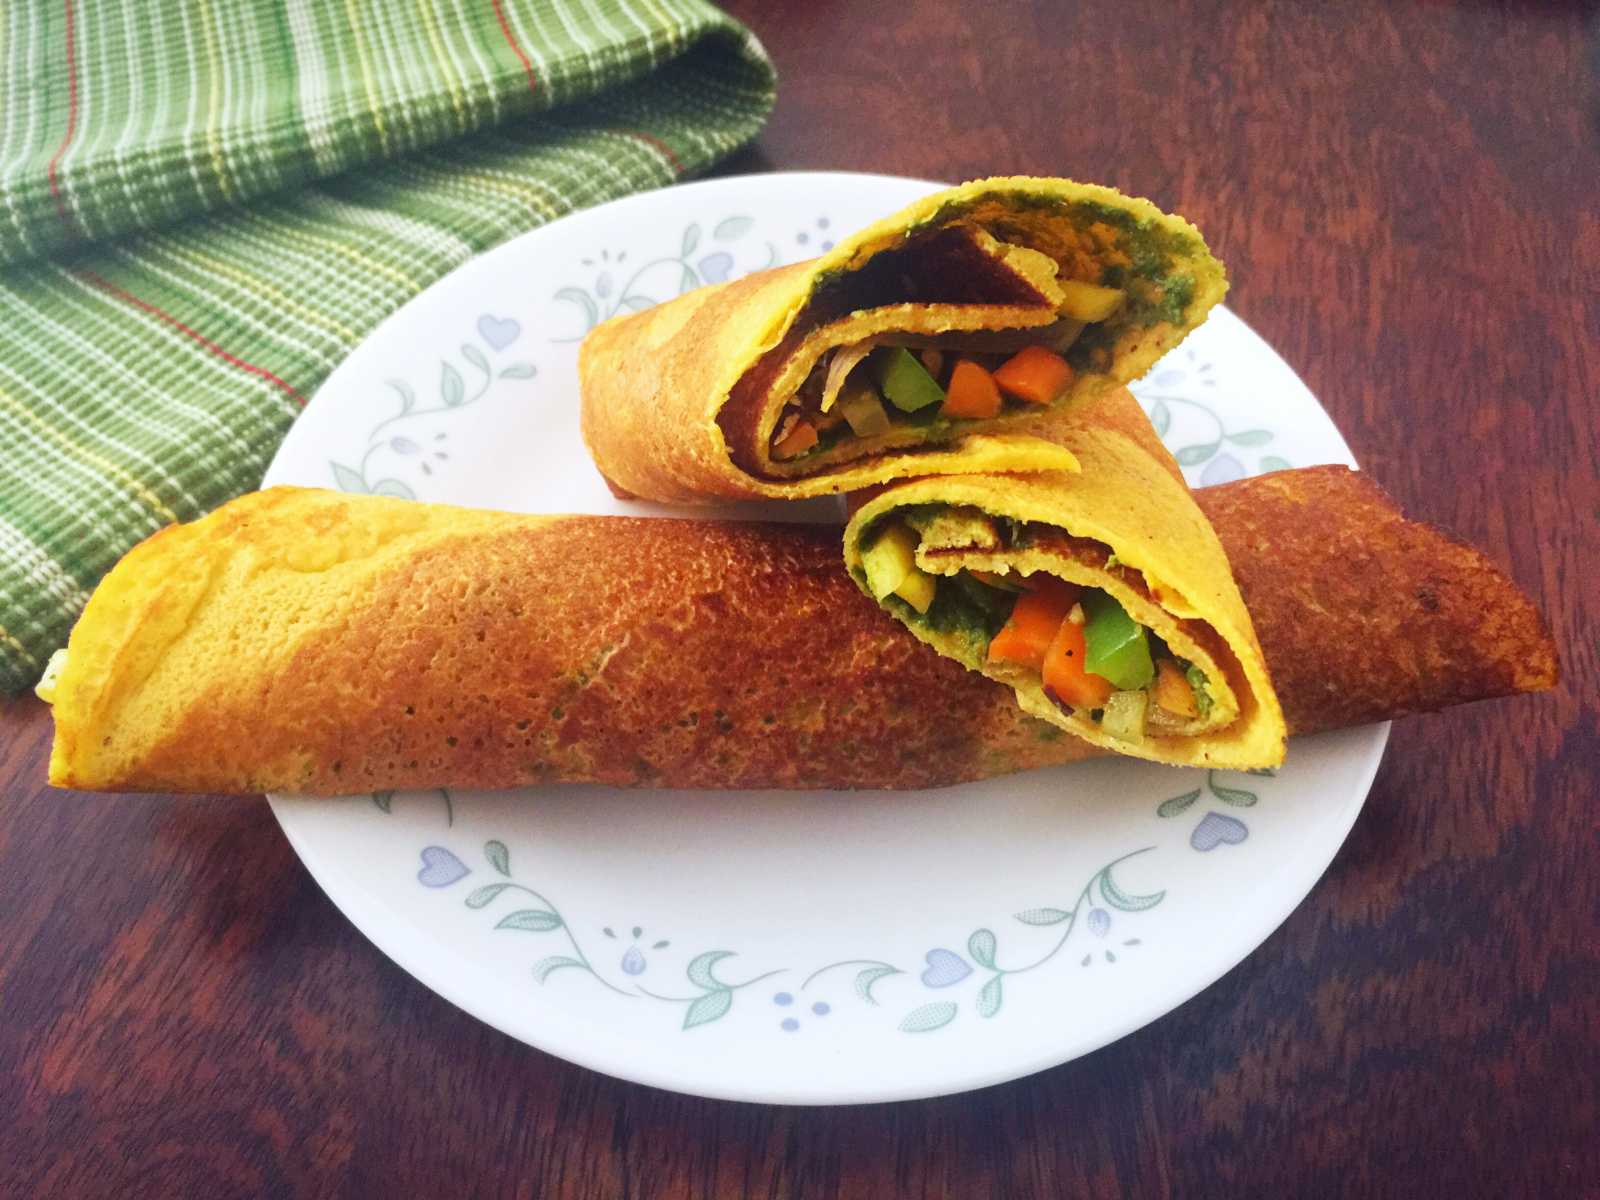 Chickpea Flour Crepes Recipe With Salad And Chutney Spread